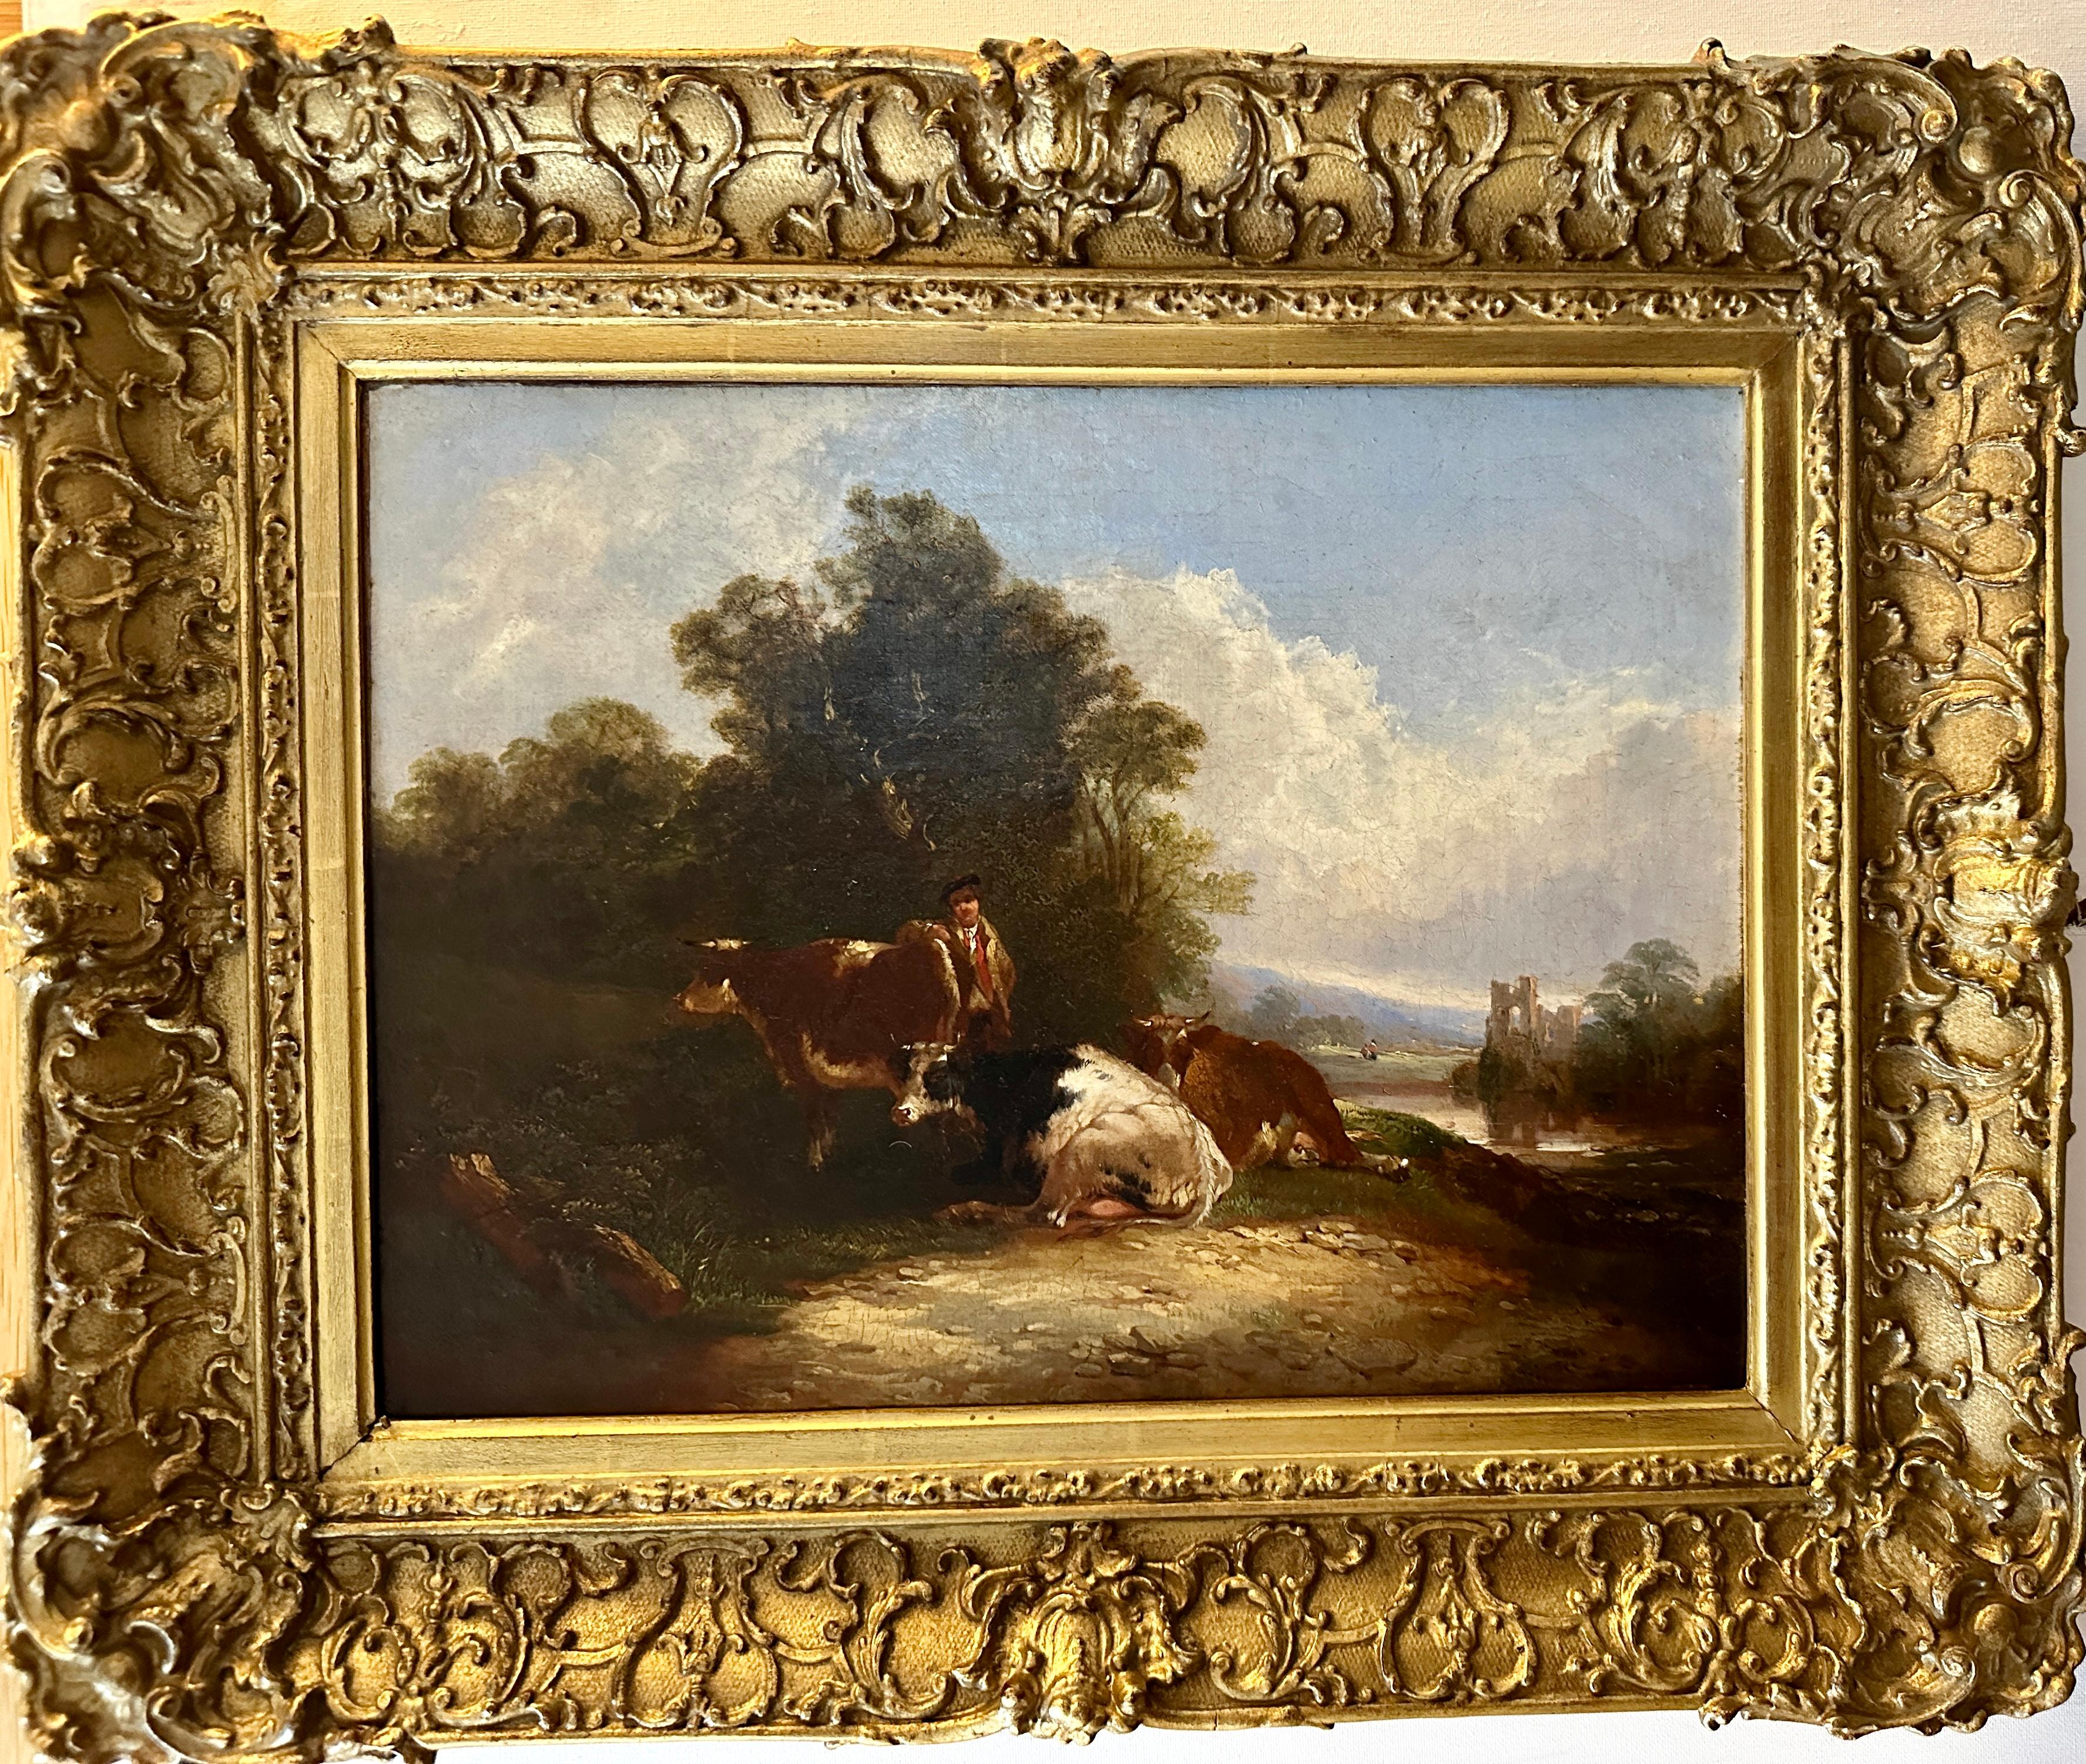 William Shayer Senior Landscape Painting - English 19th century Antique landscape with horses and farmer by a Cottage